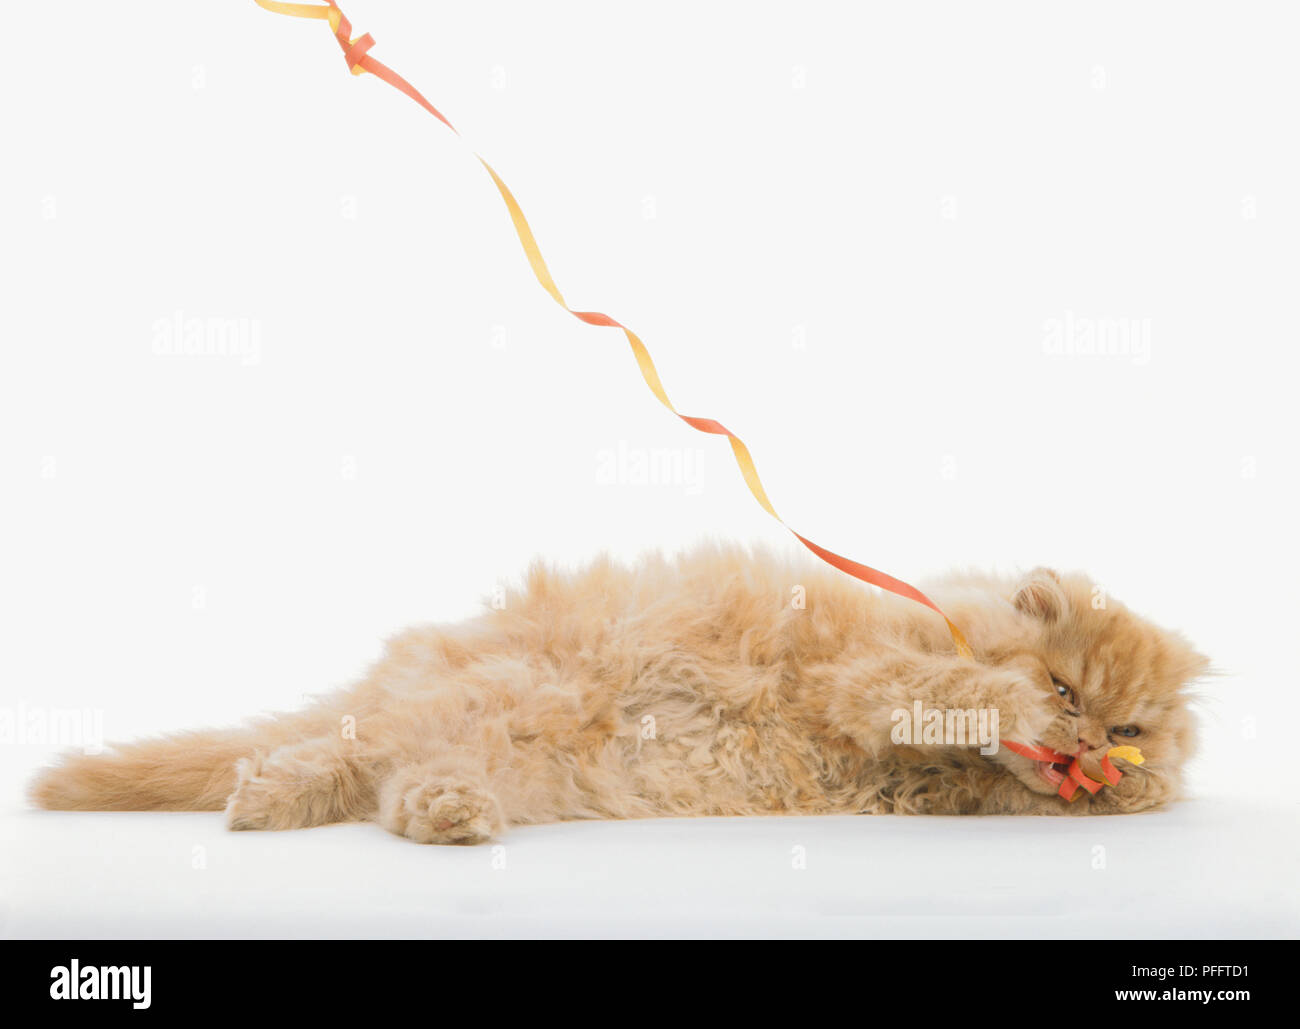 Long-haired cream-coloured kitten (Felis catus) playing with a streamer, side view Stock Photo